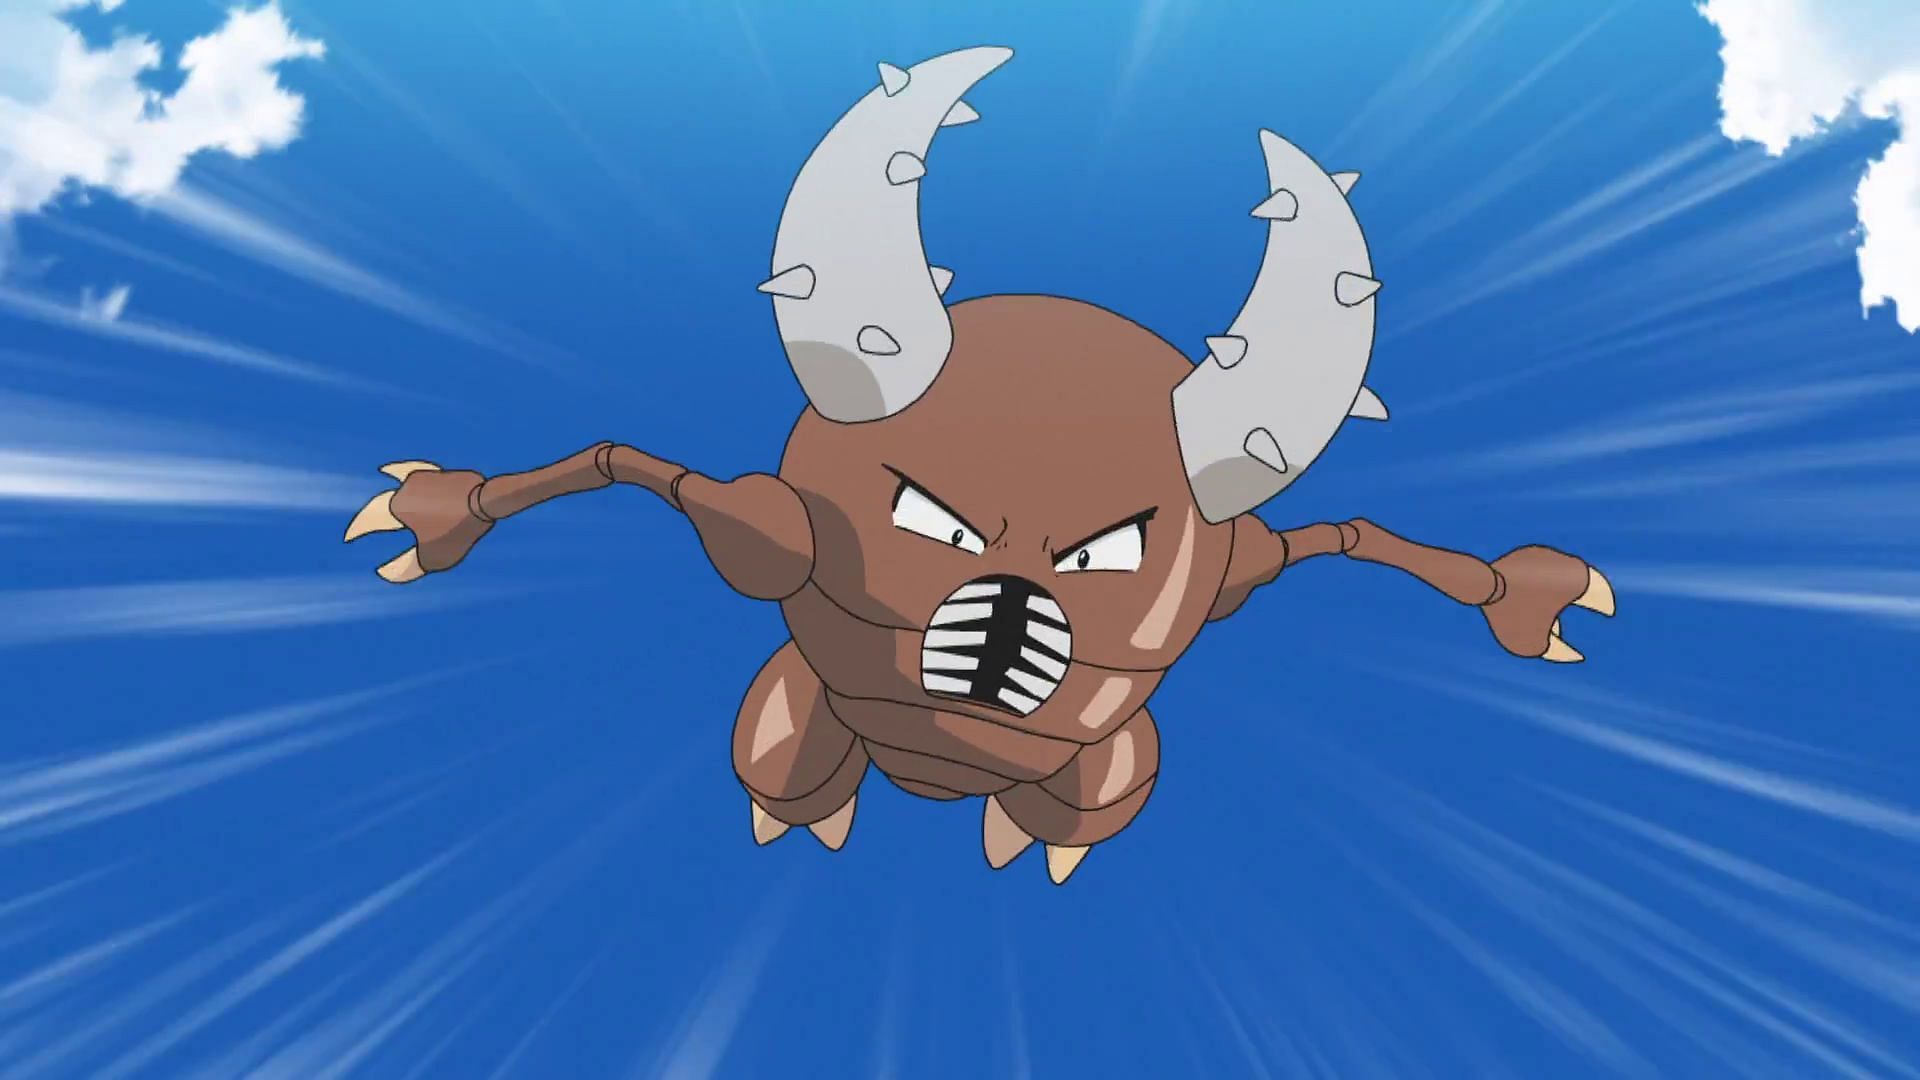 Pinsir has access to strong moves like X-Scissor and Close Combat (Image via The Pokemon Company)